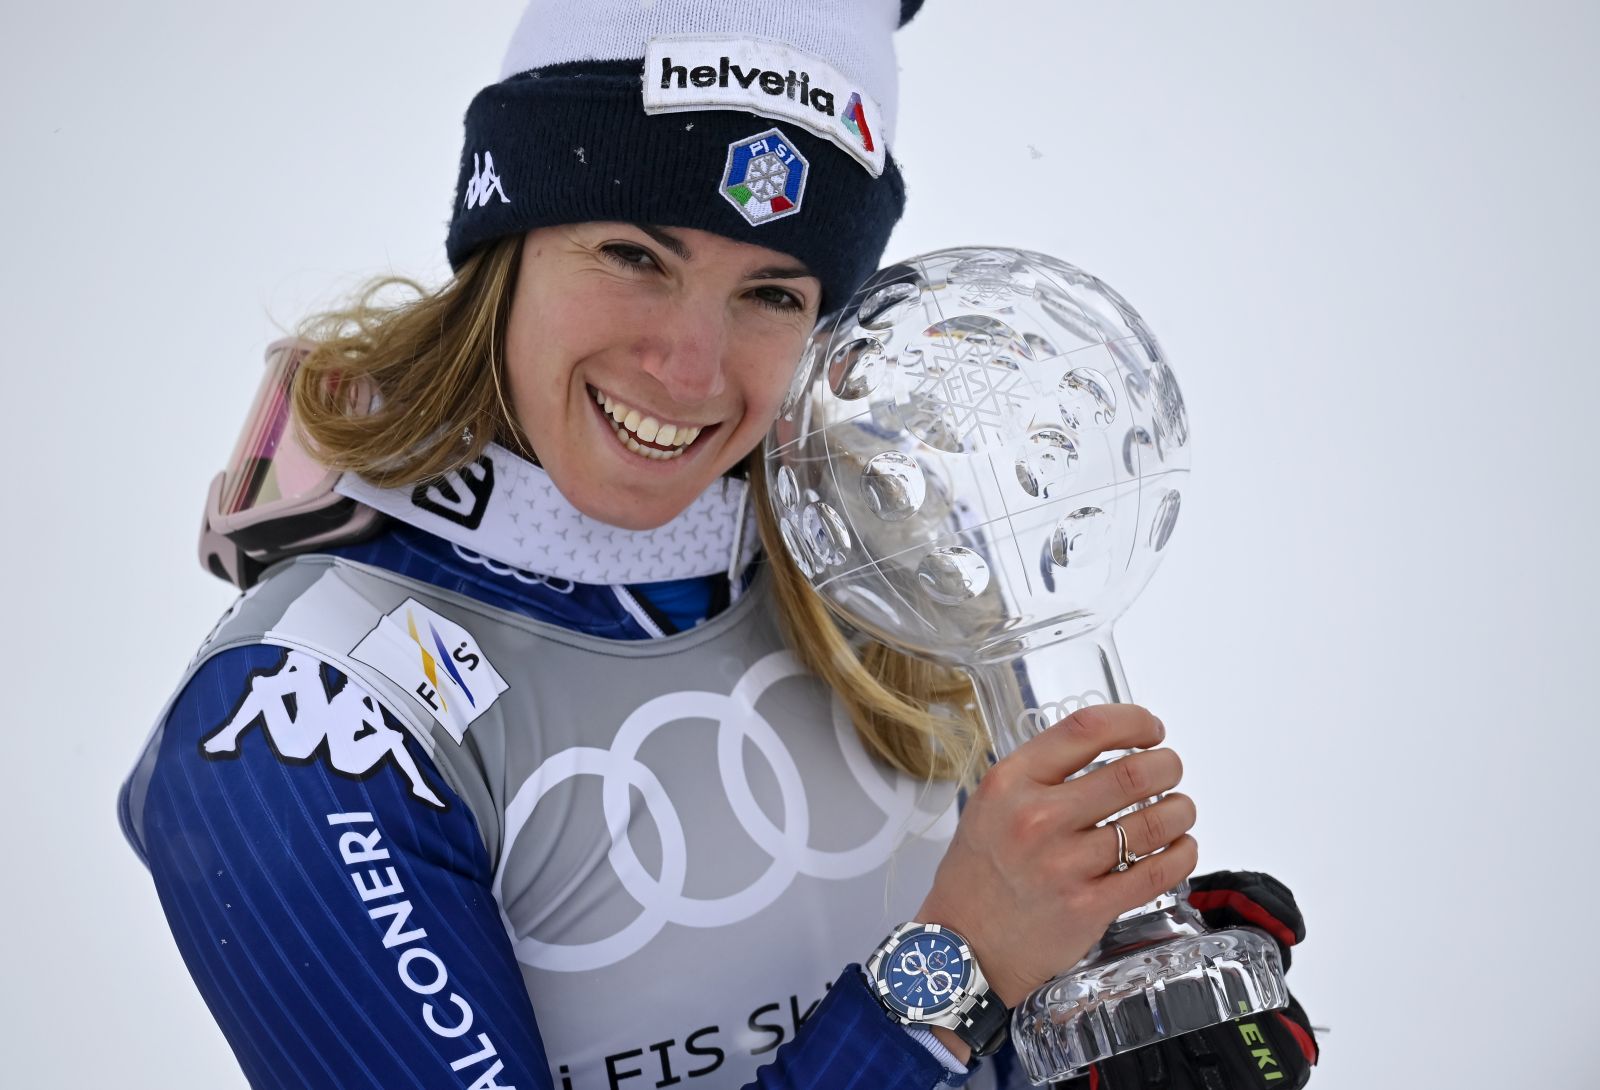 epa09087541 Italy's Marta Bassino celebrates with the crystal globe during the award ceremony of the women's overall Giant Slalom competition at the FIS Alpine Skiing World Cup finals in Lenzerheide, Switzerland, 21 March 2021.  EPA/GIAN EHRENZELLER